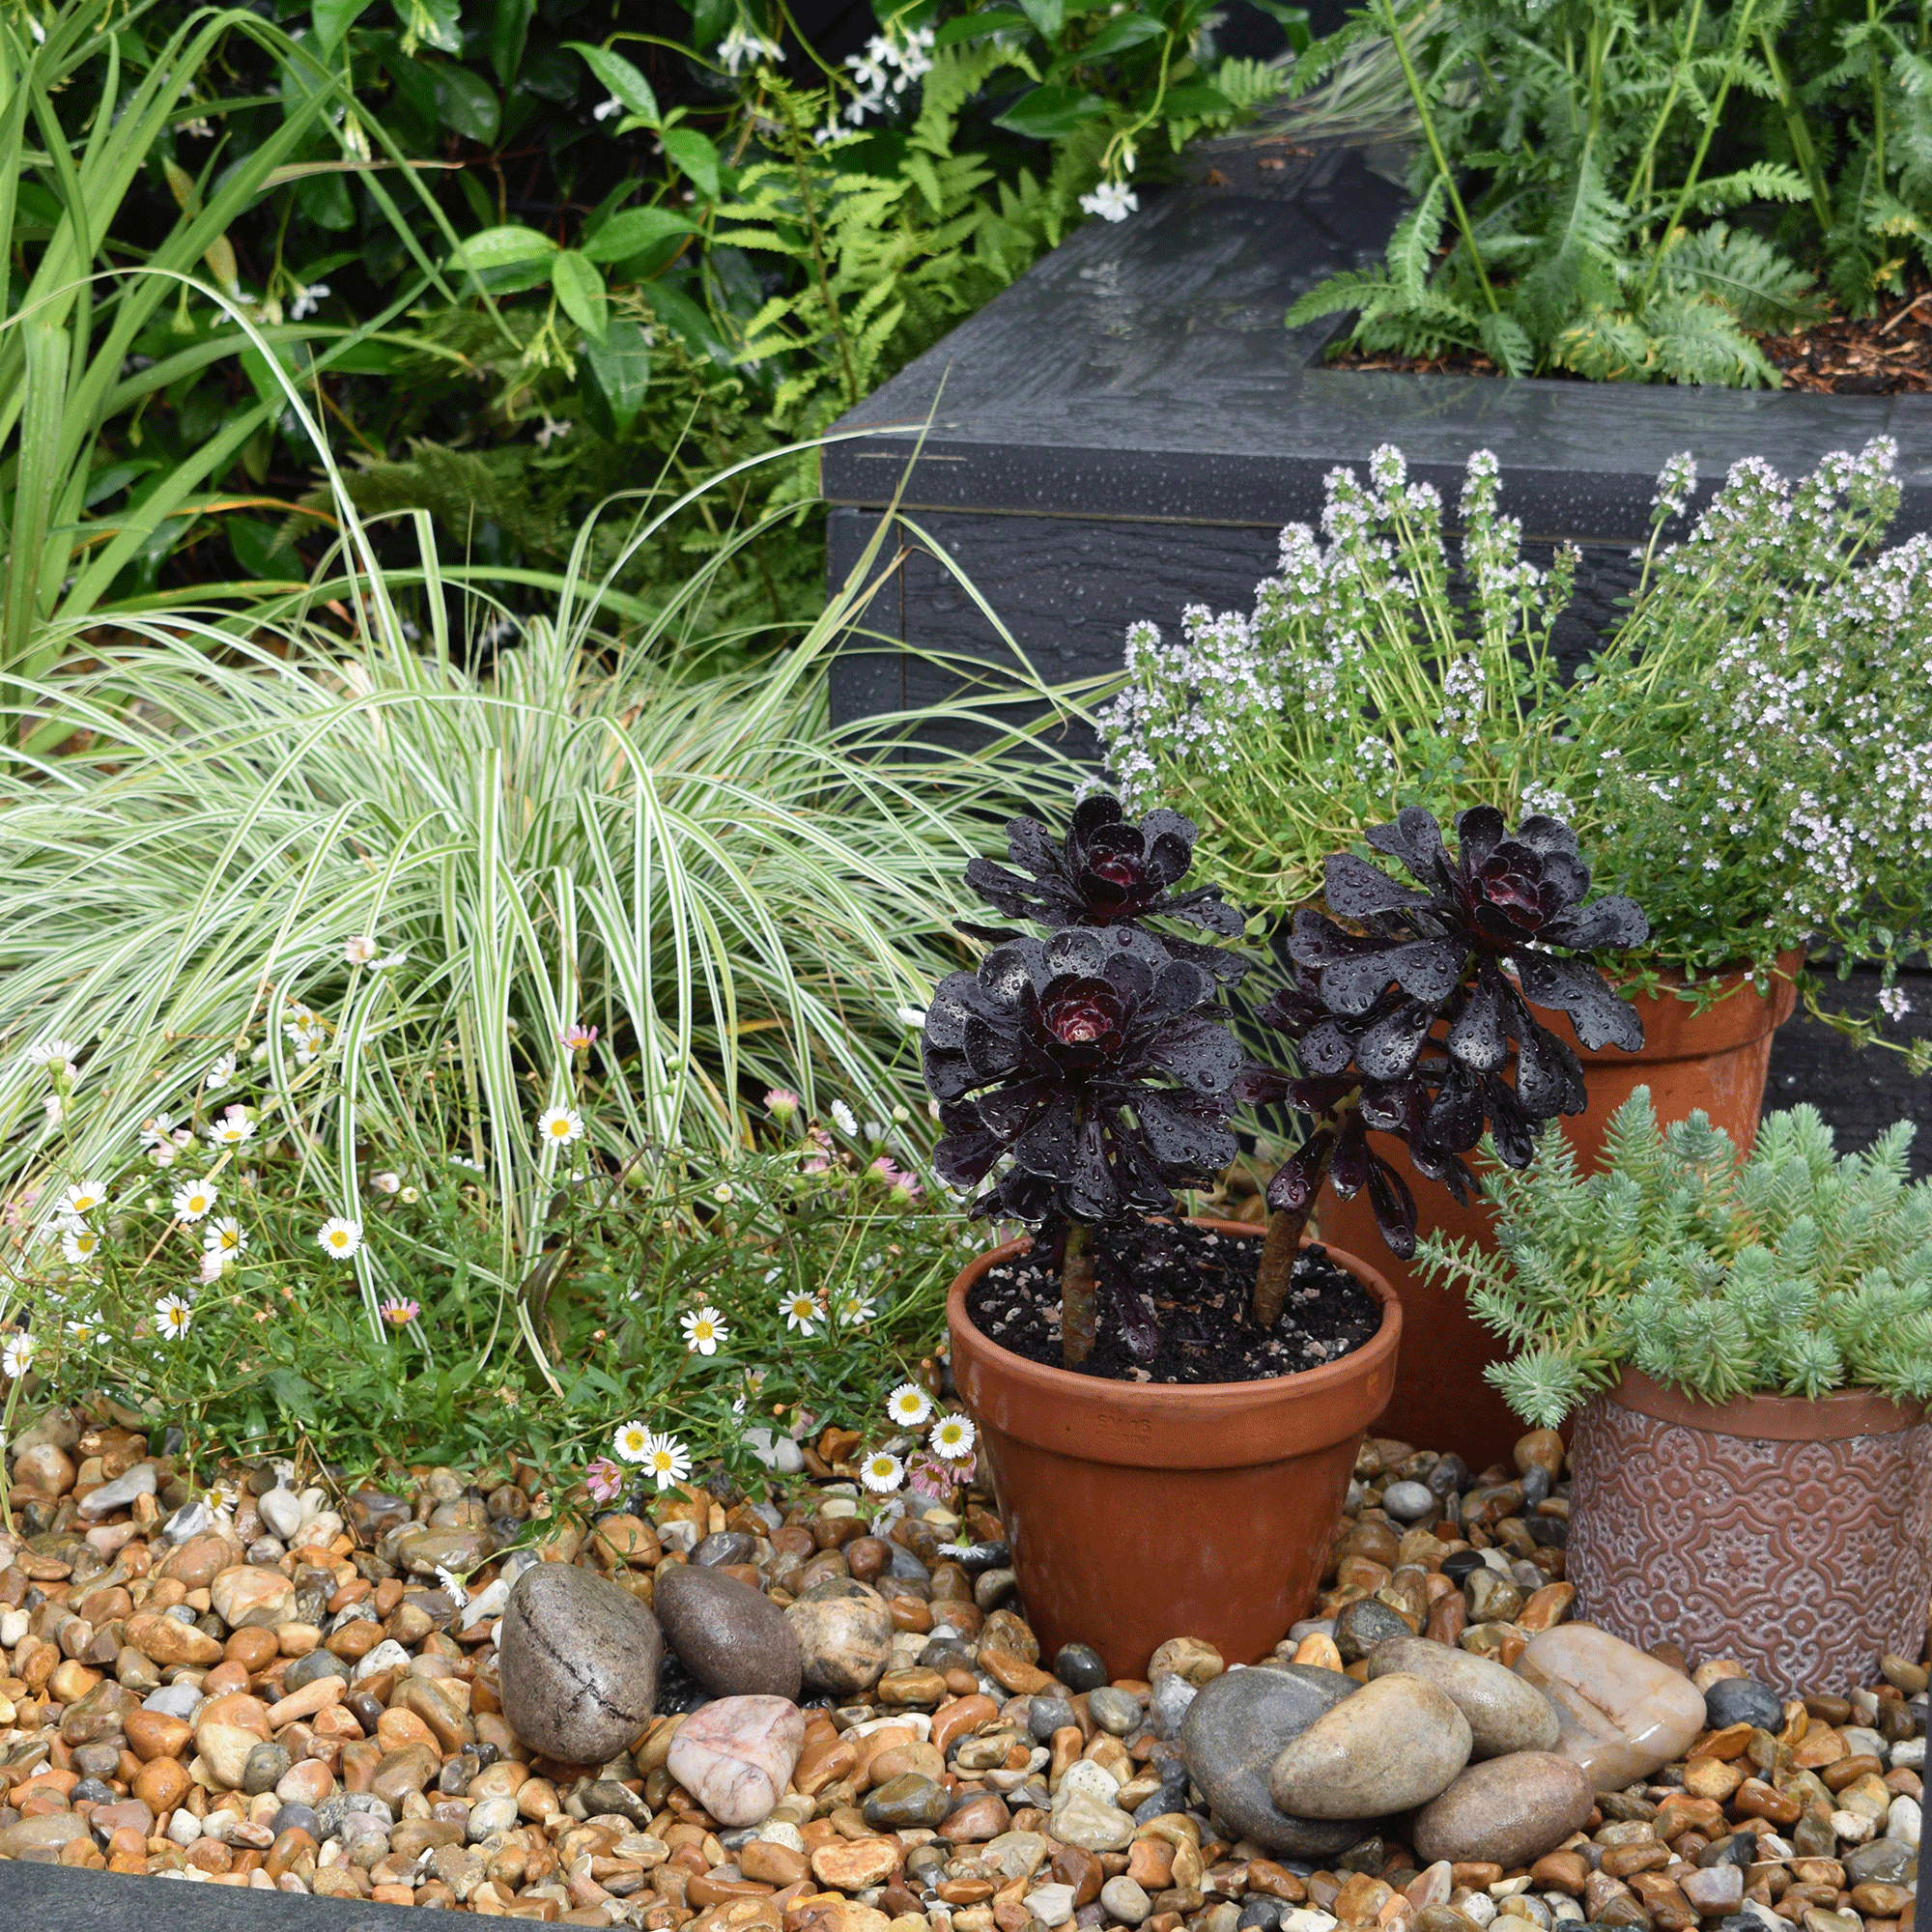 Drought tolerant garden with containers